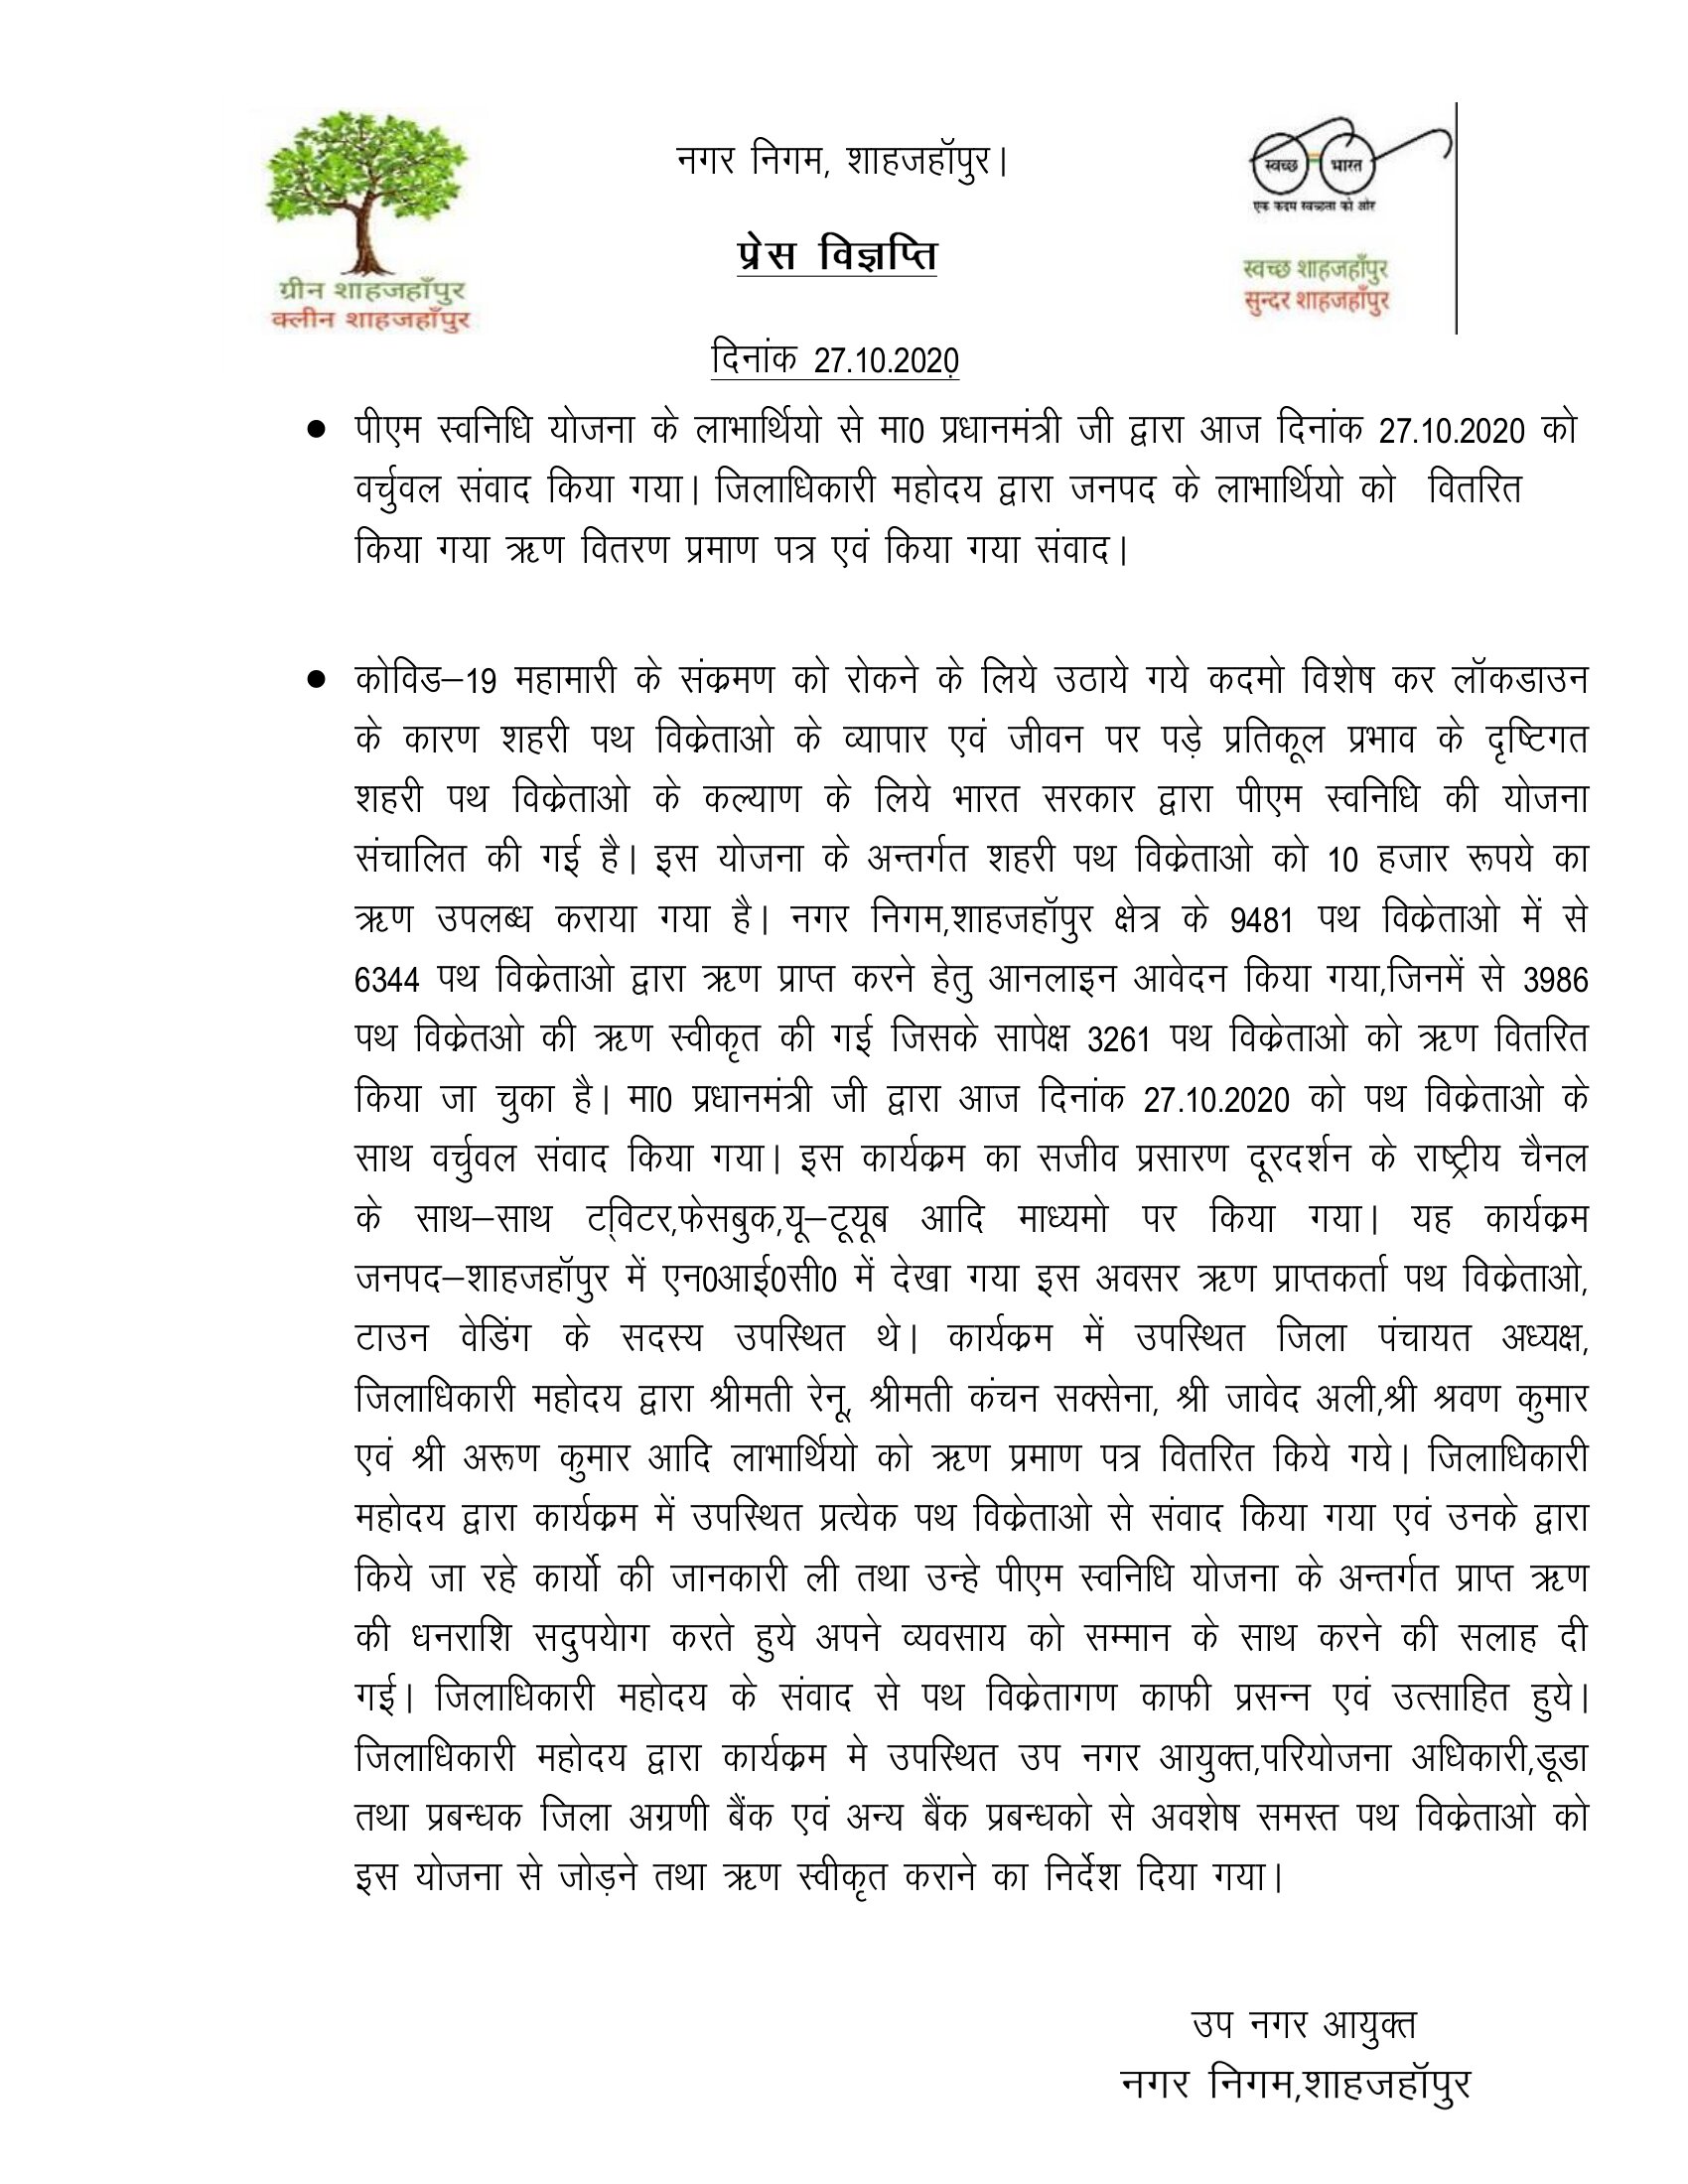 Regarding virtual dialogue of Hon’ble Prime Minister with the beneficiaries of PM Swanidhi Yojna on 27.10.2020